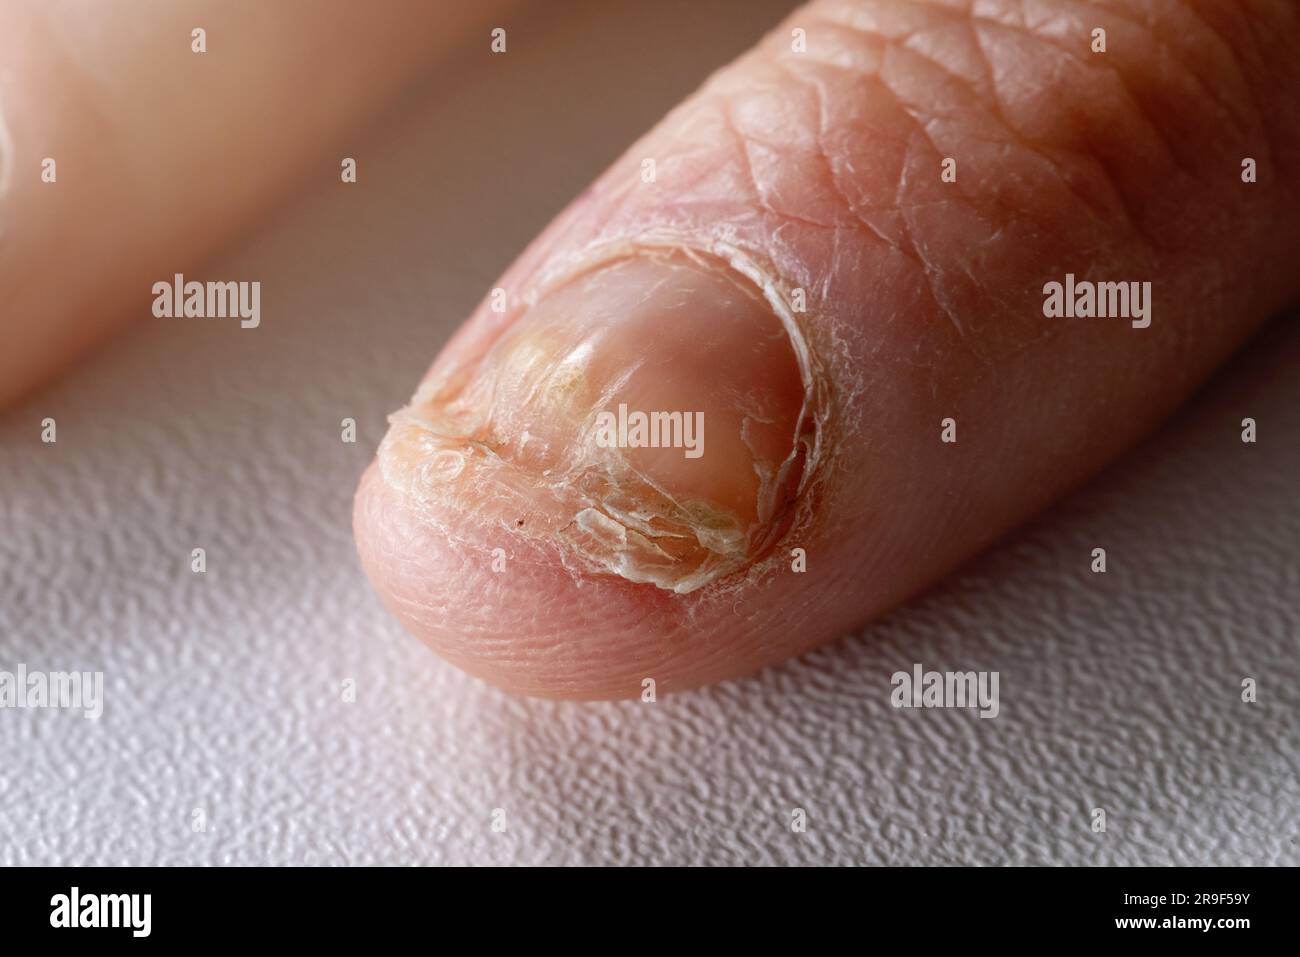 Koilonychia (Spoon Nails): What It Is, Causes & Treatment